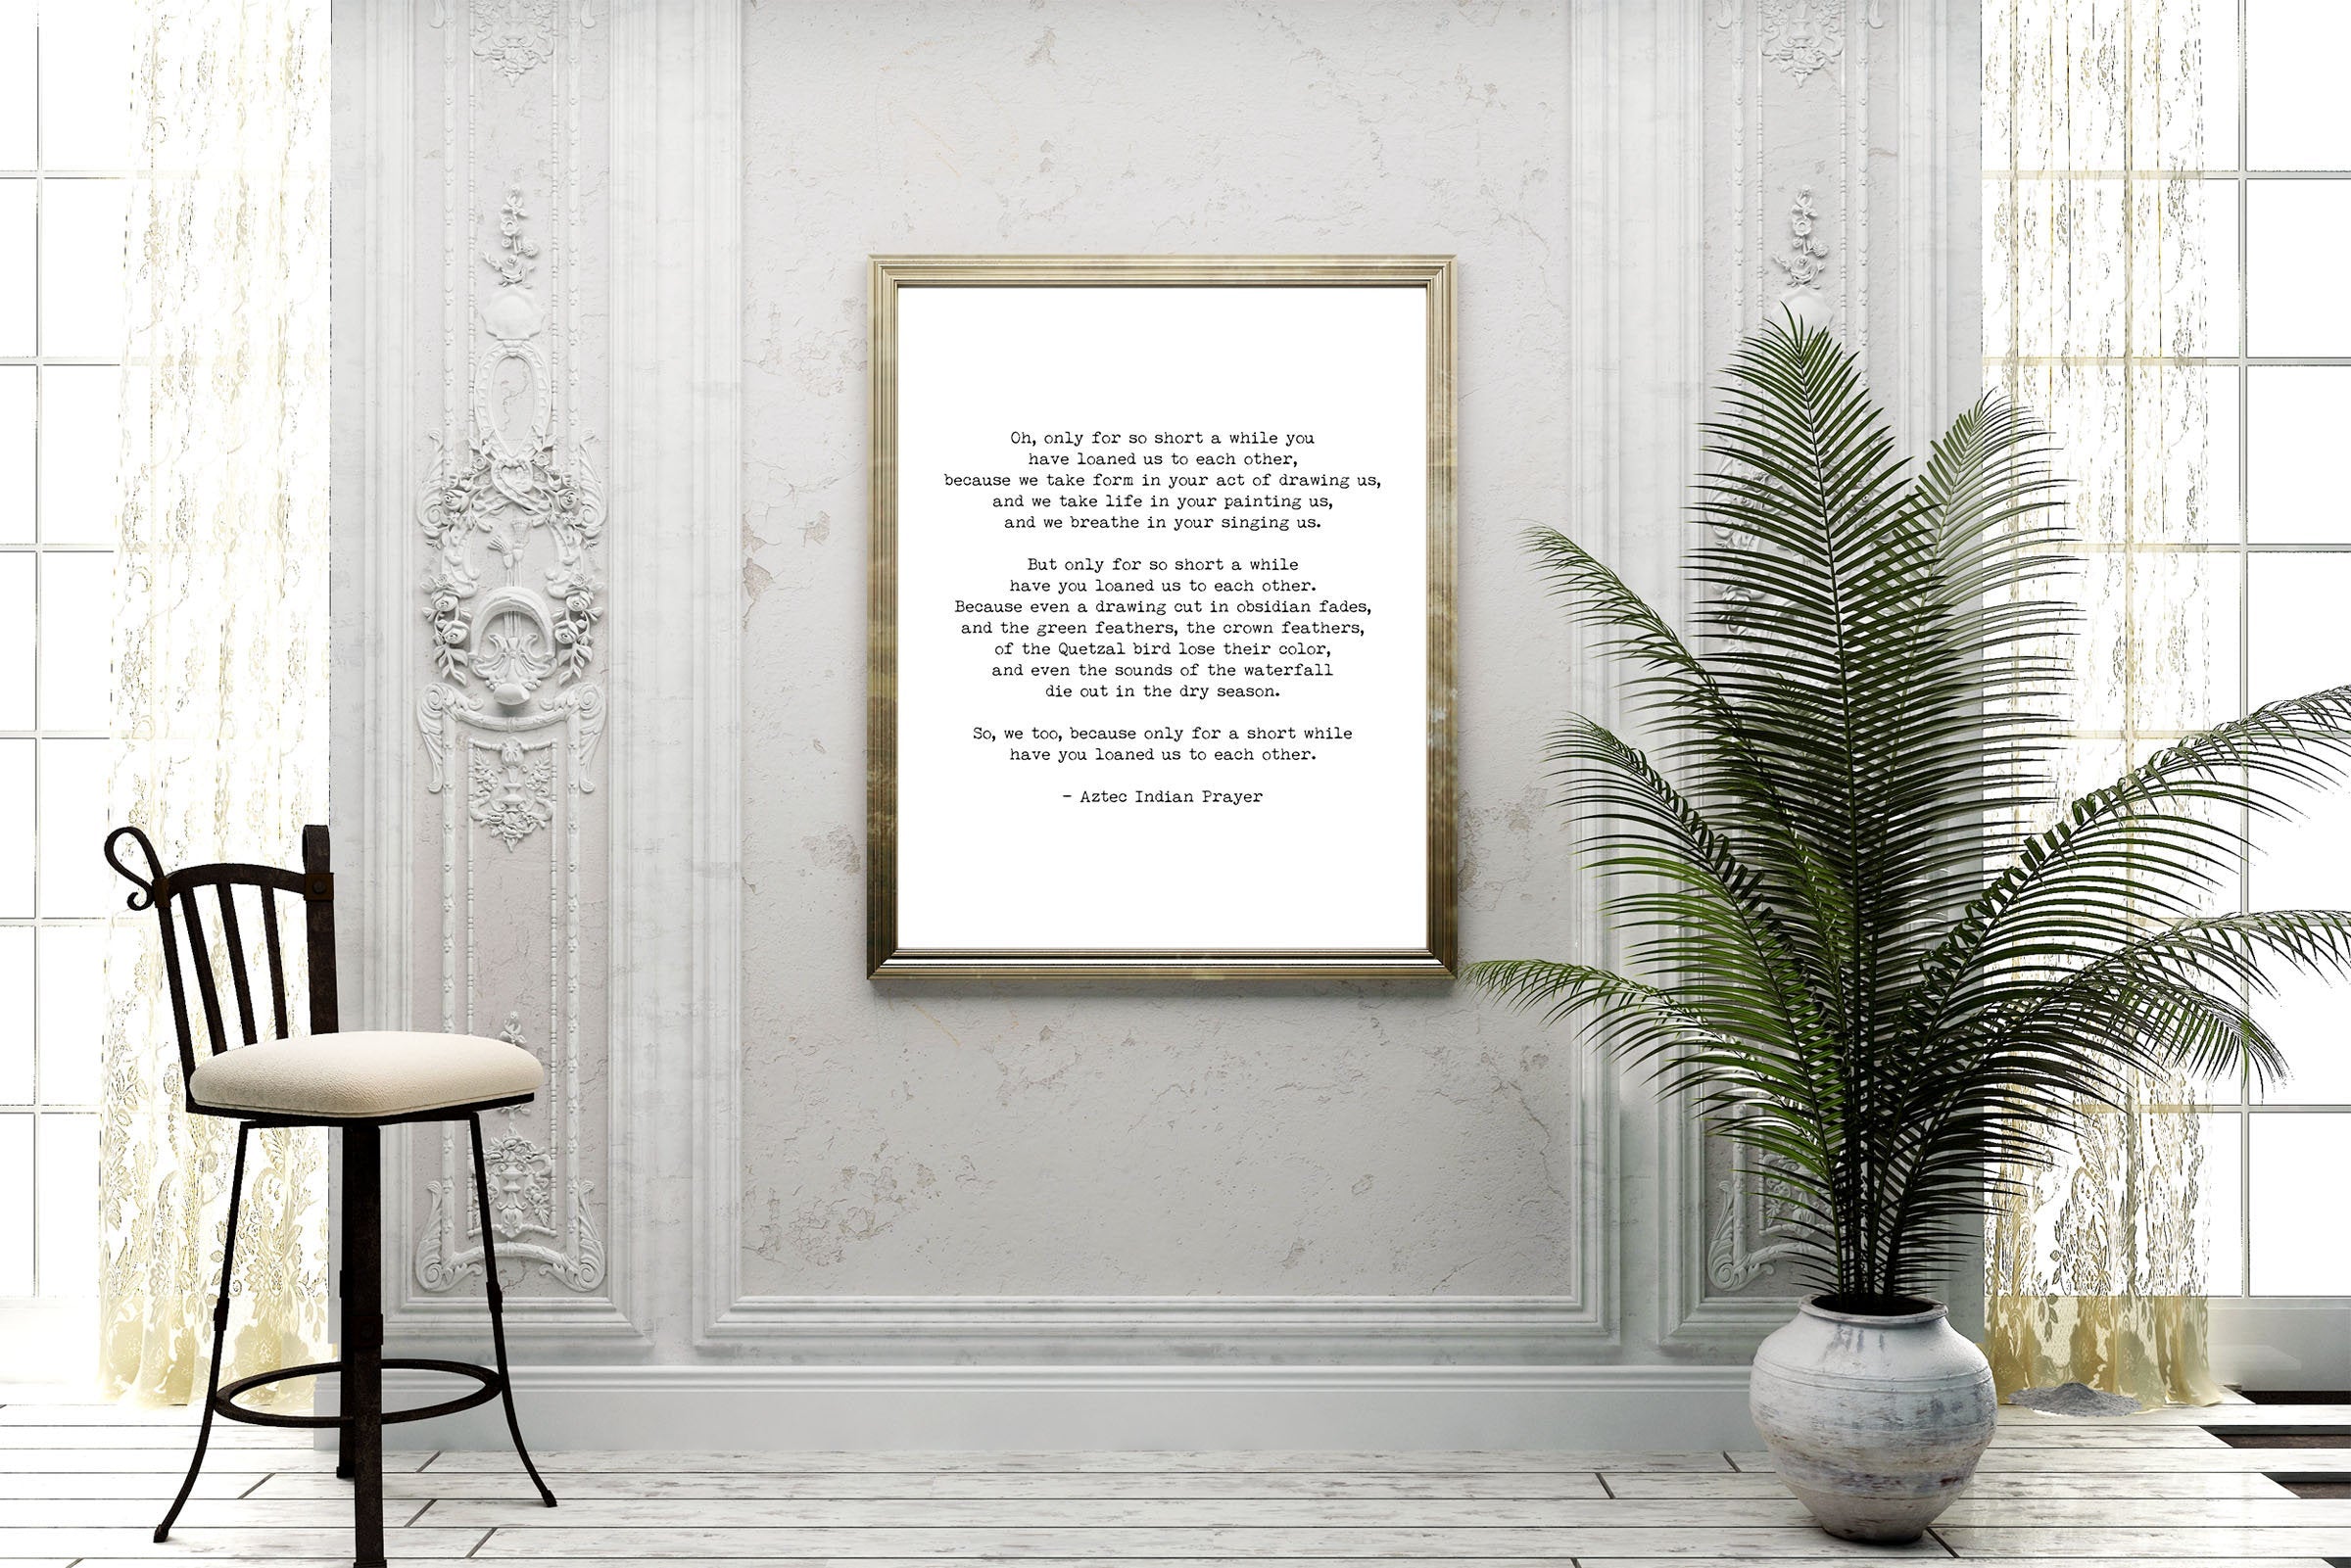 Native American Aztec Prayer Quote Print in Black & White, Oh Only For So Short A While Inspirational Gift Wall Art Print Unframed - BookQuoteDecor